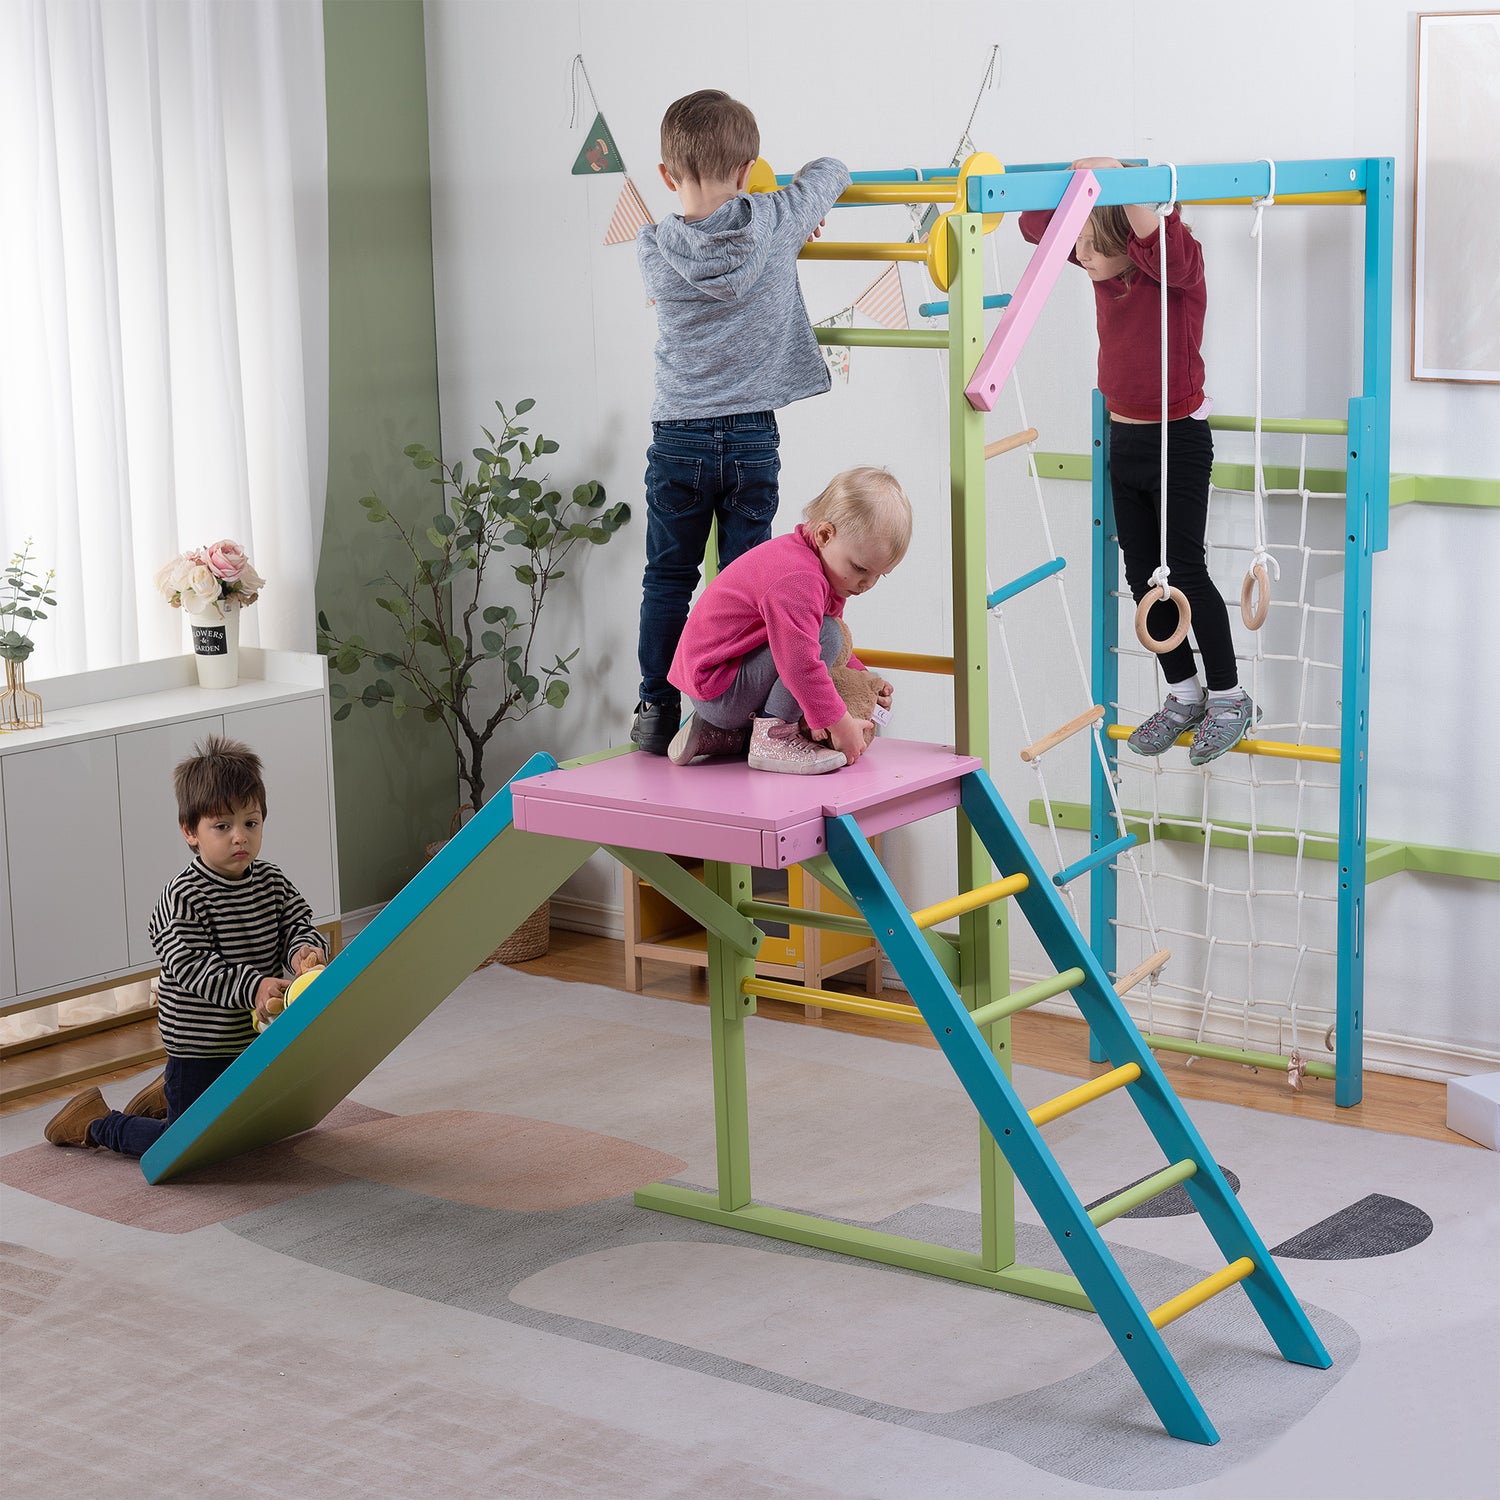 Children Playing on The Grove Jungle Gym - Avenlur's Premium 8 in 1 Wooden Playset for Older Kids - Colorful Edition